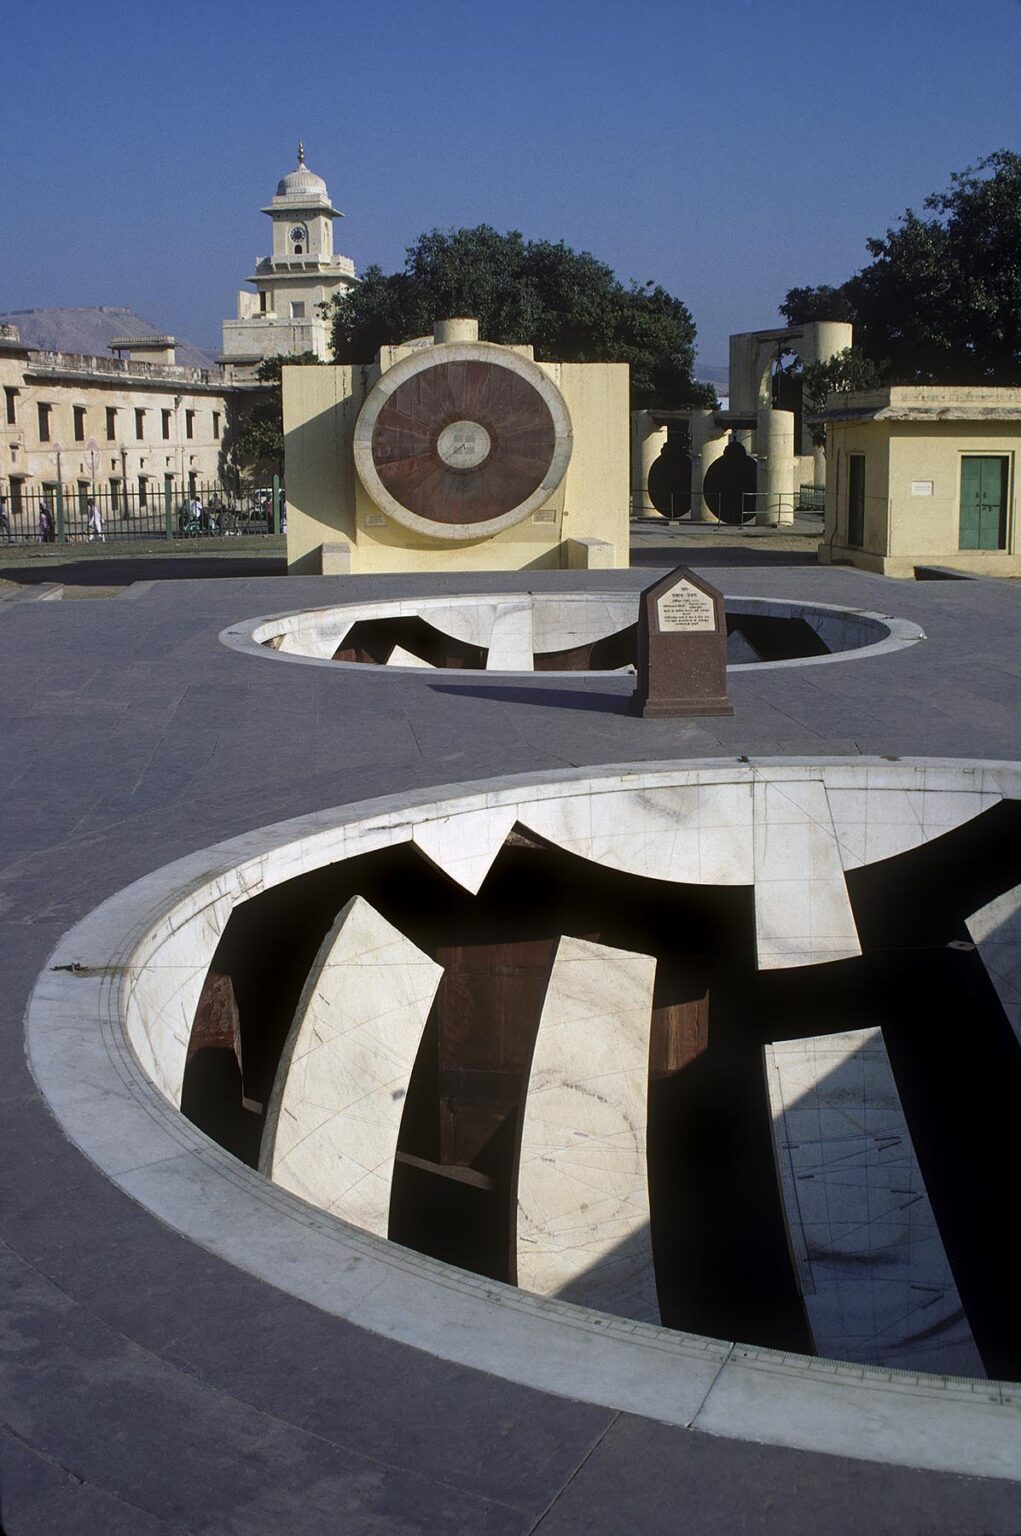 Astrological measurement devices at the JAIPUR OBSERVATORY (Jantar Mantar), built in 1728 - RAJASTHAN, INDIA